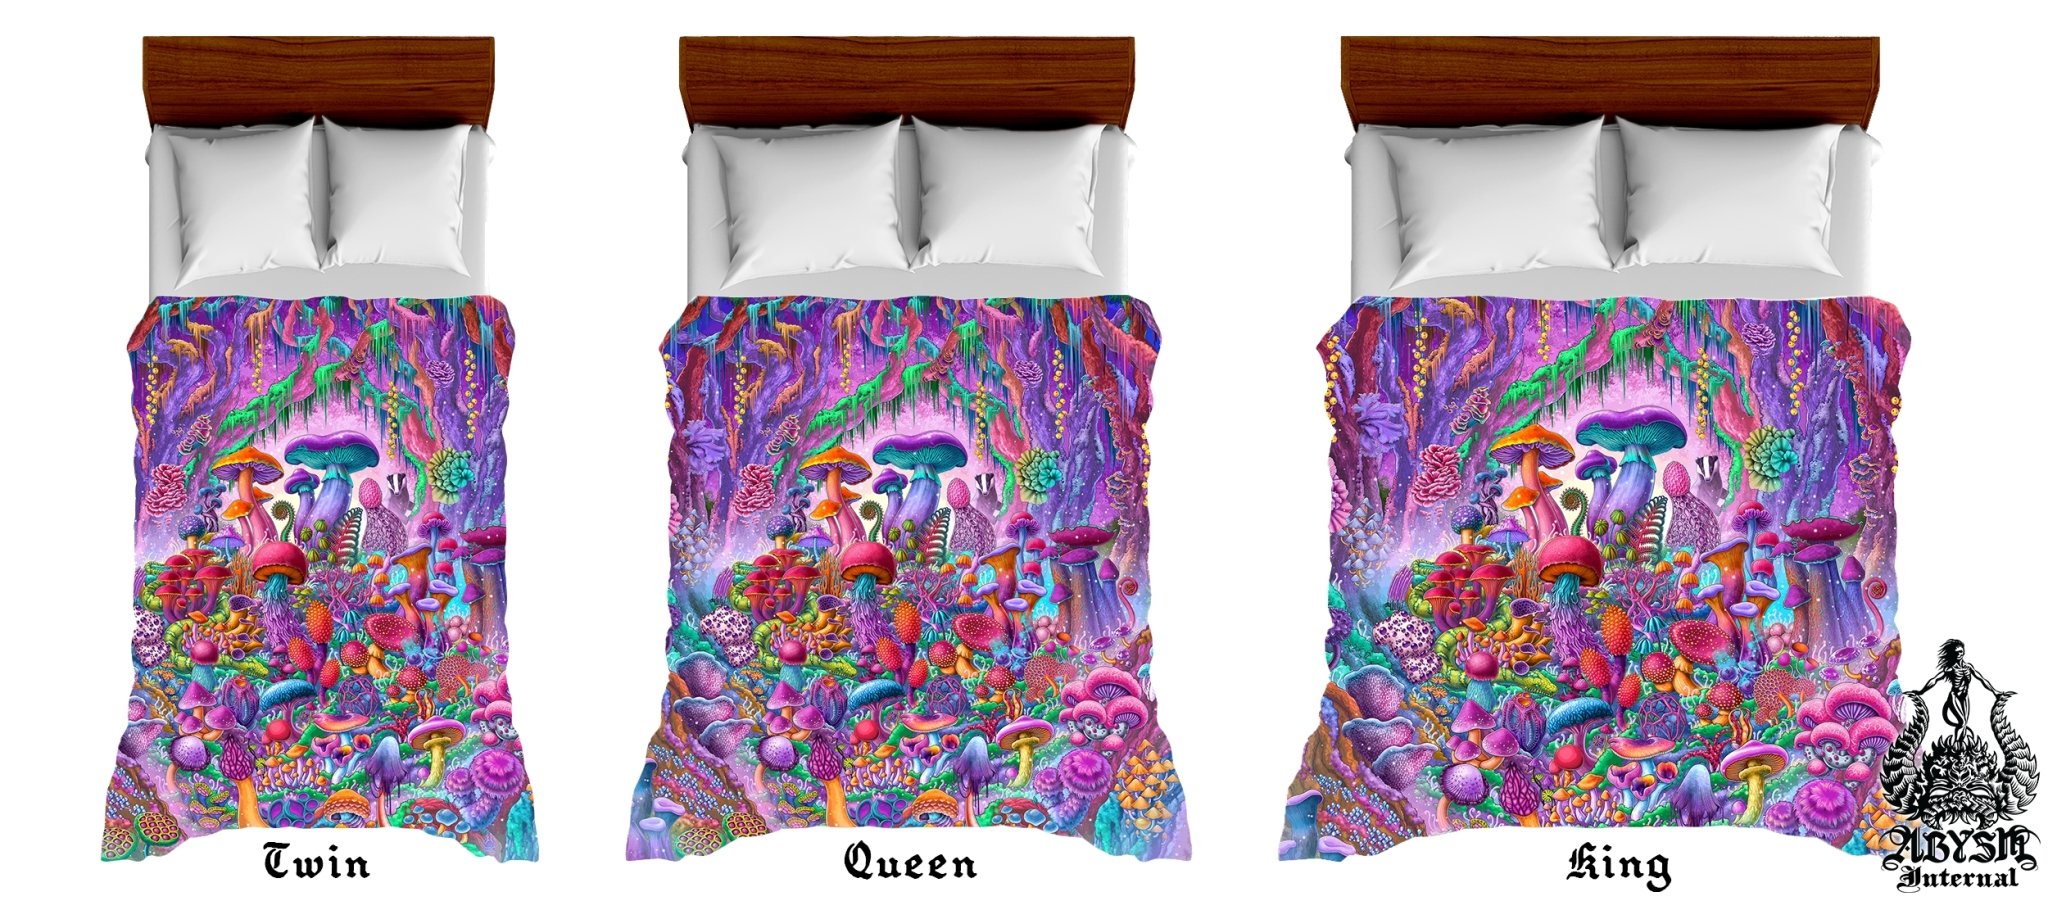 Mushrooms Bedding Set, Comforter and Duvet, Kids and Girls Fantasy Bed Cover, Psychedelic Bedroom Decor, King, Queen and Twin Size - Magic Shrooms, Aesthetic Pastel - Abysm Internal